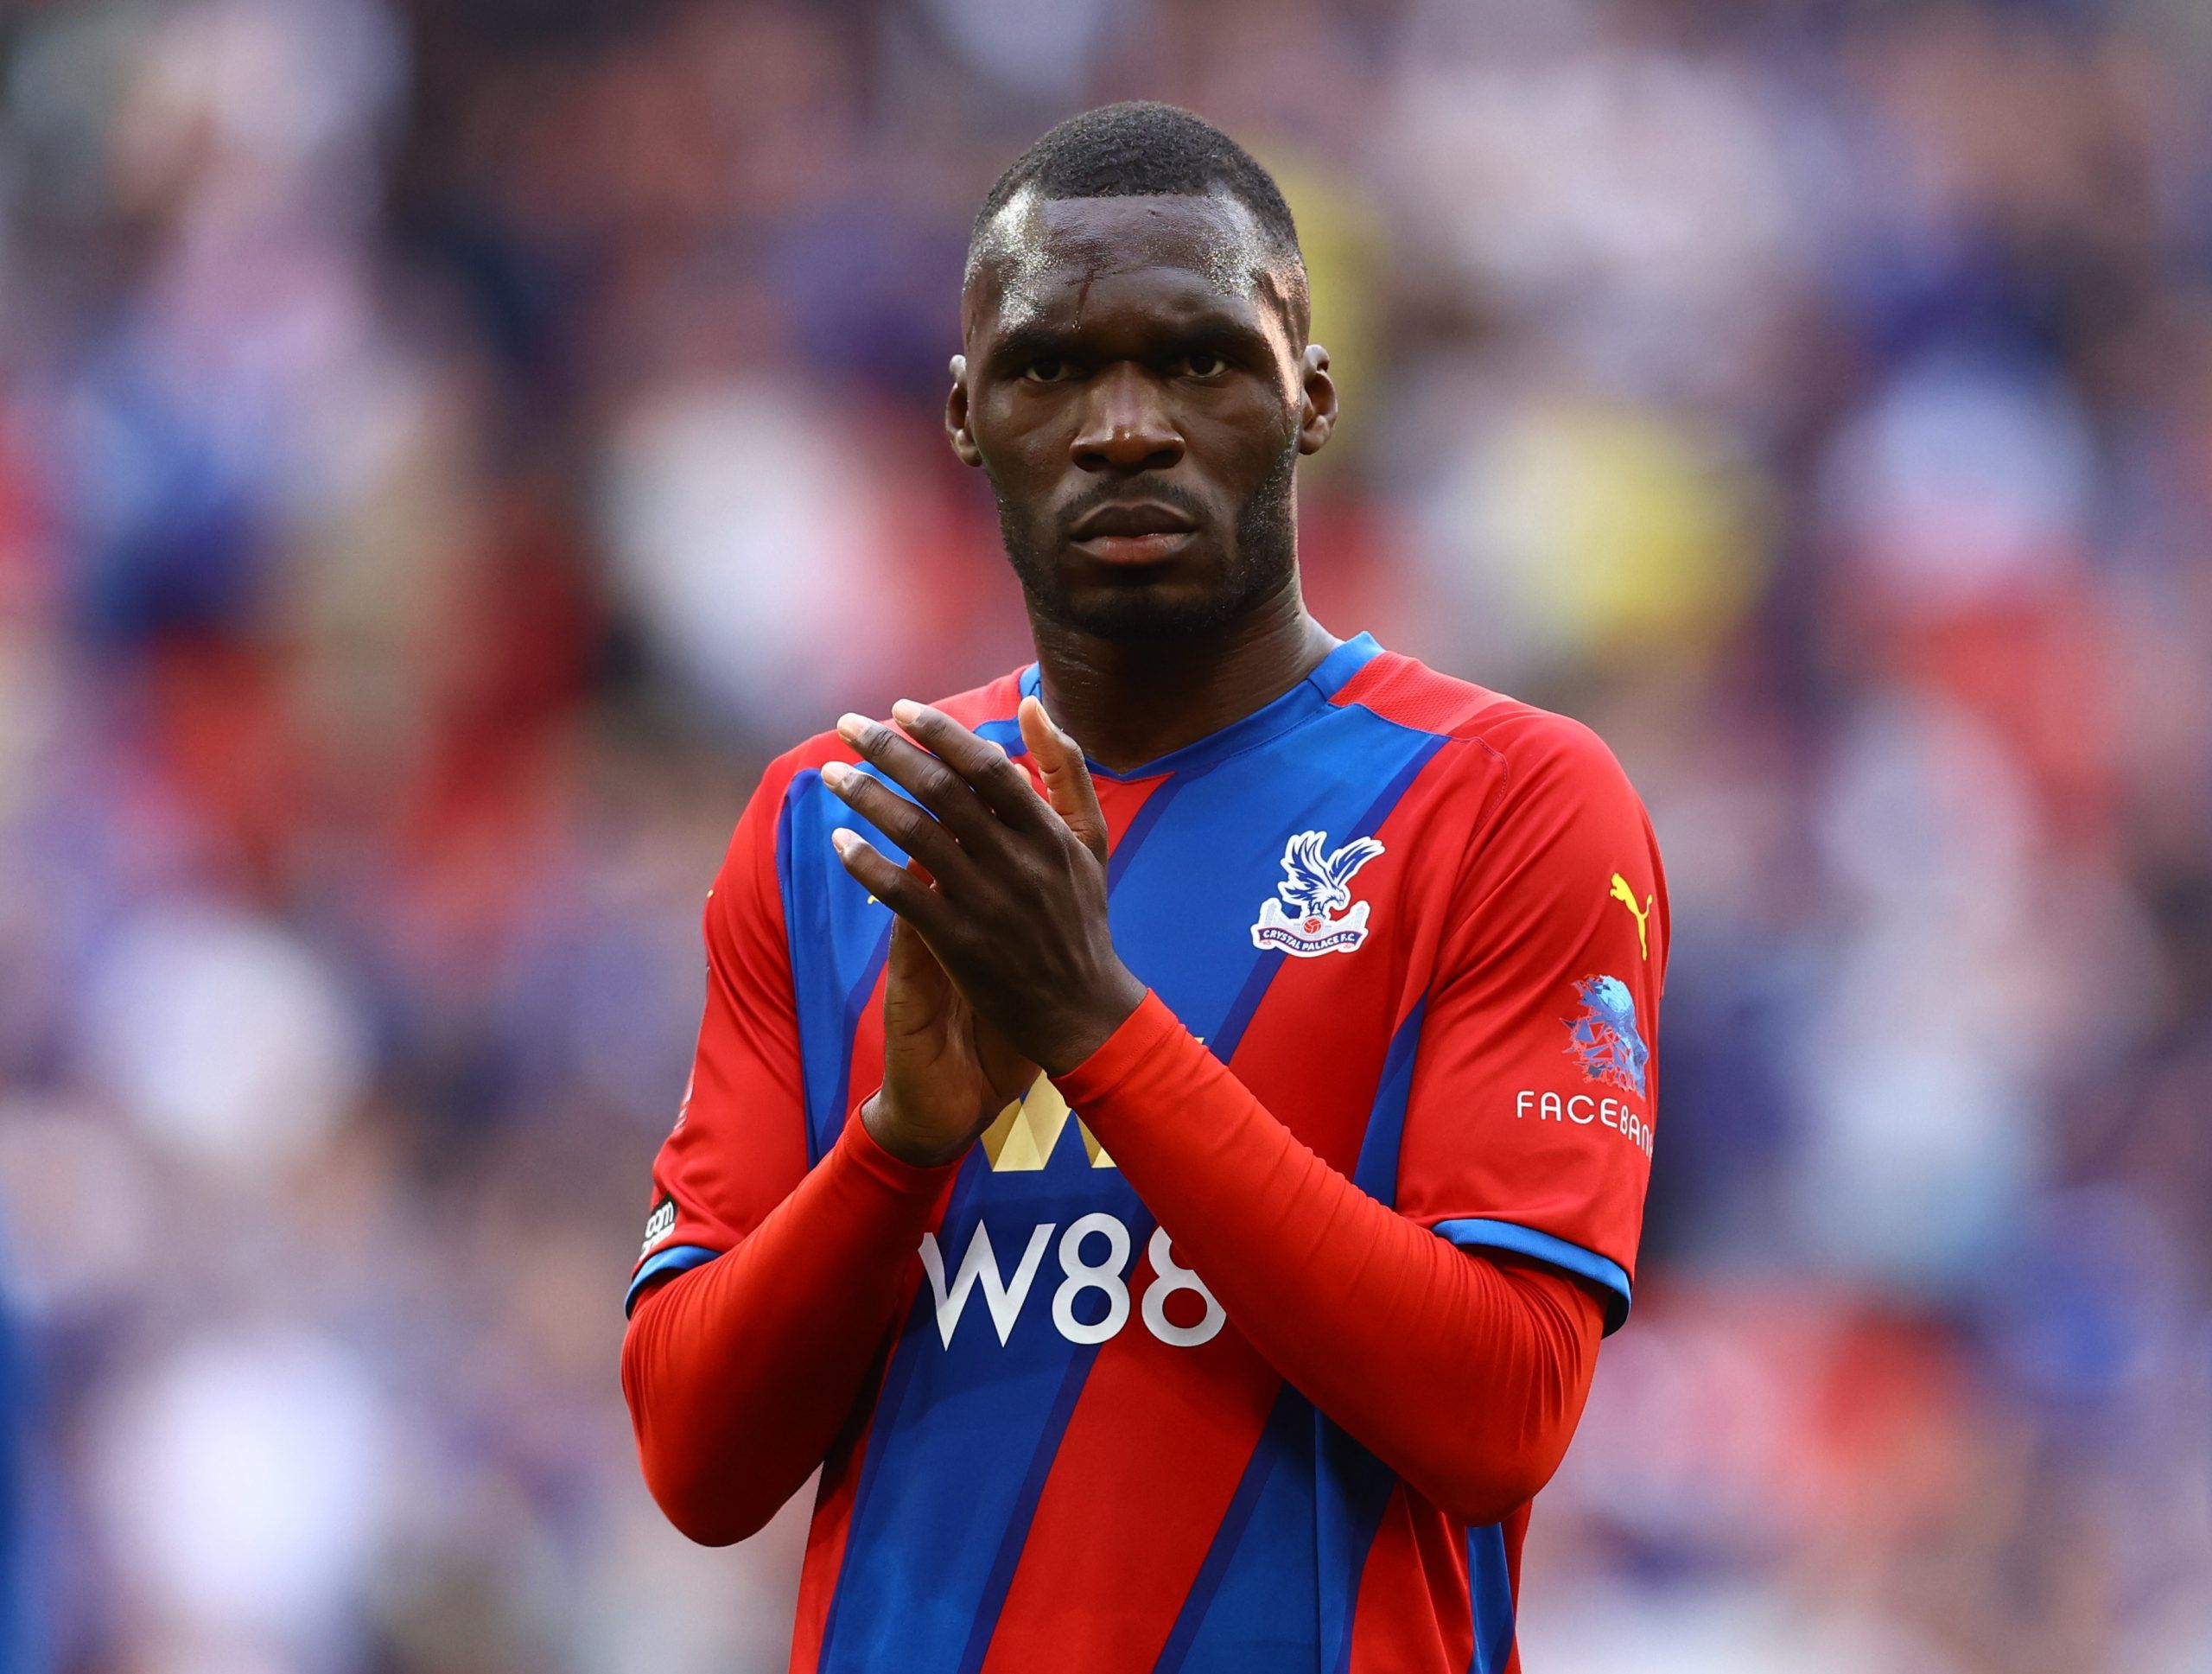 Premier League, Crystal Palace, Christian Benteke, CPFC, CPFC news, CPFC opinion, CPFC transfers, Palace transfers, Palace opinion, Palace news